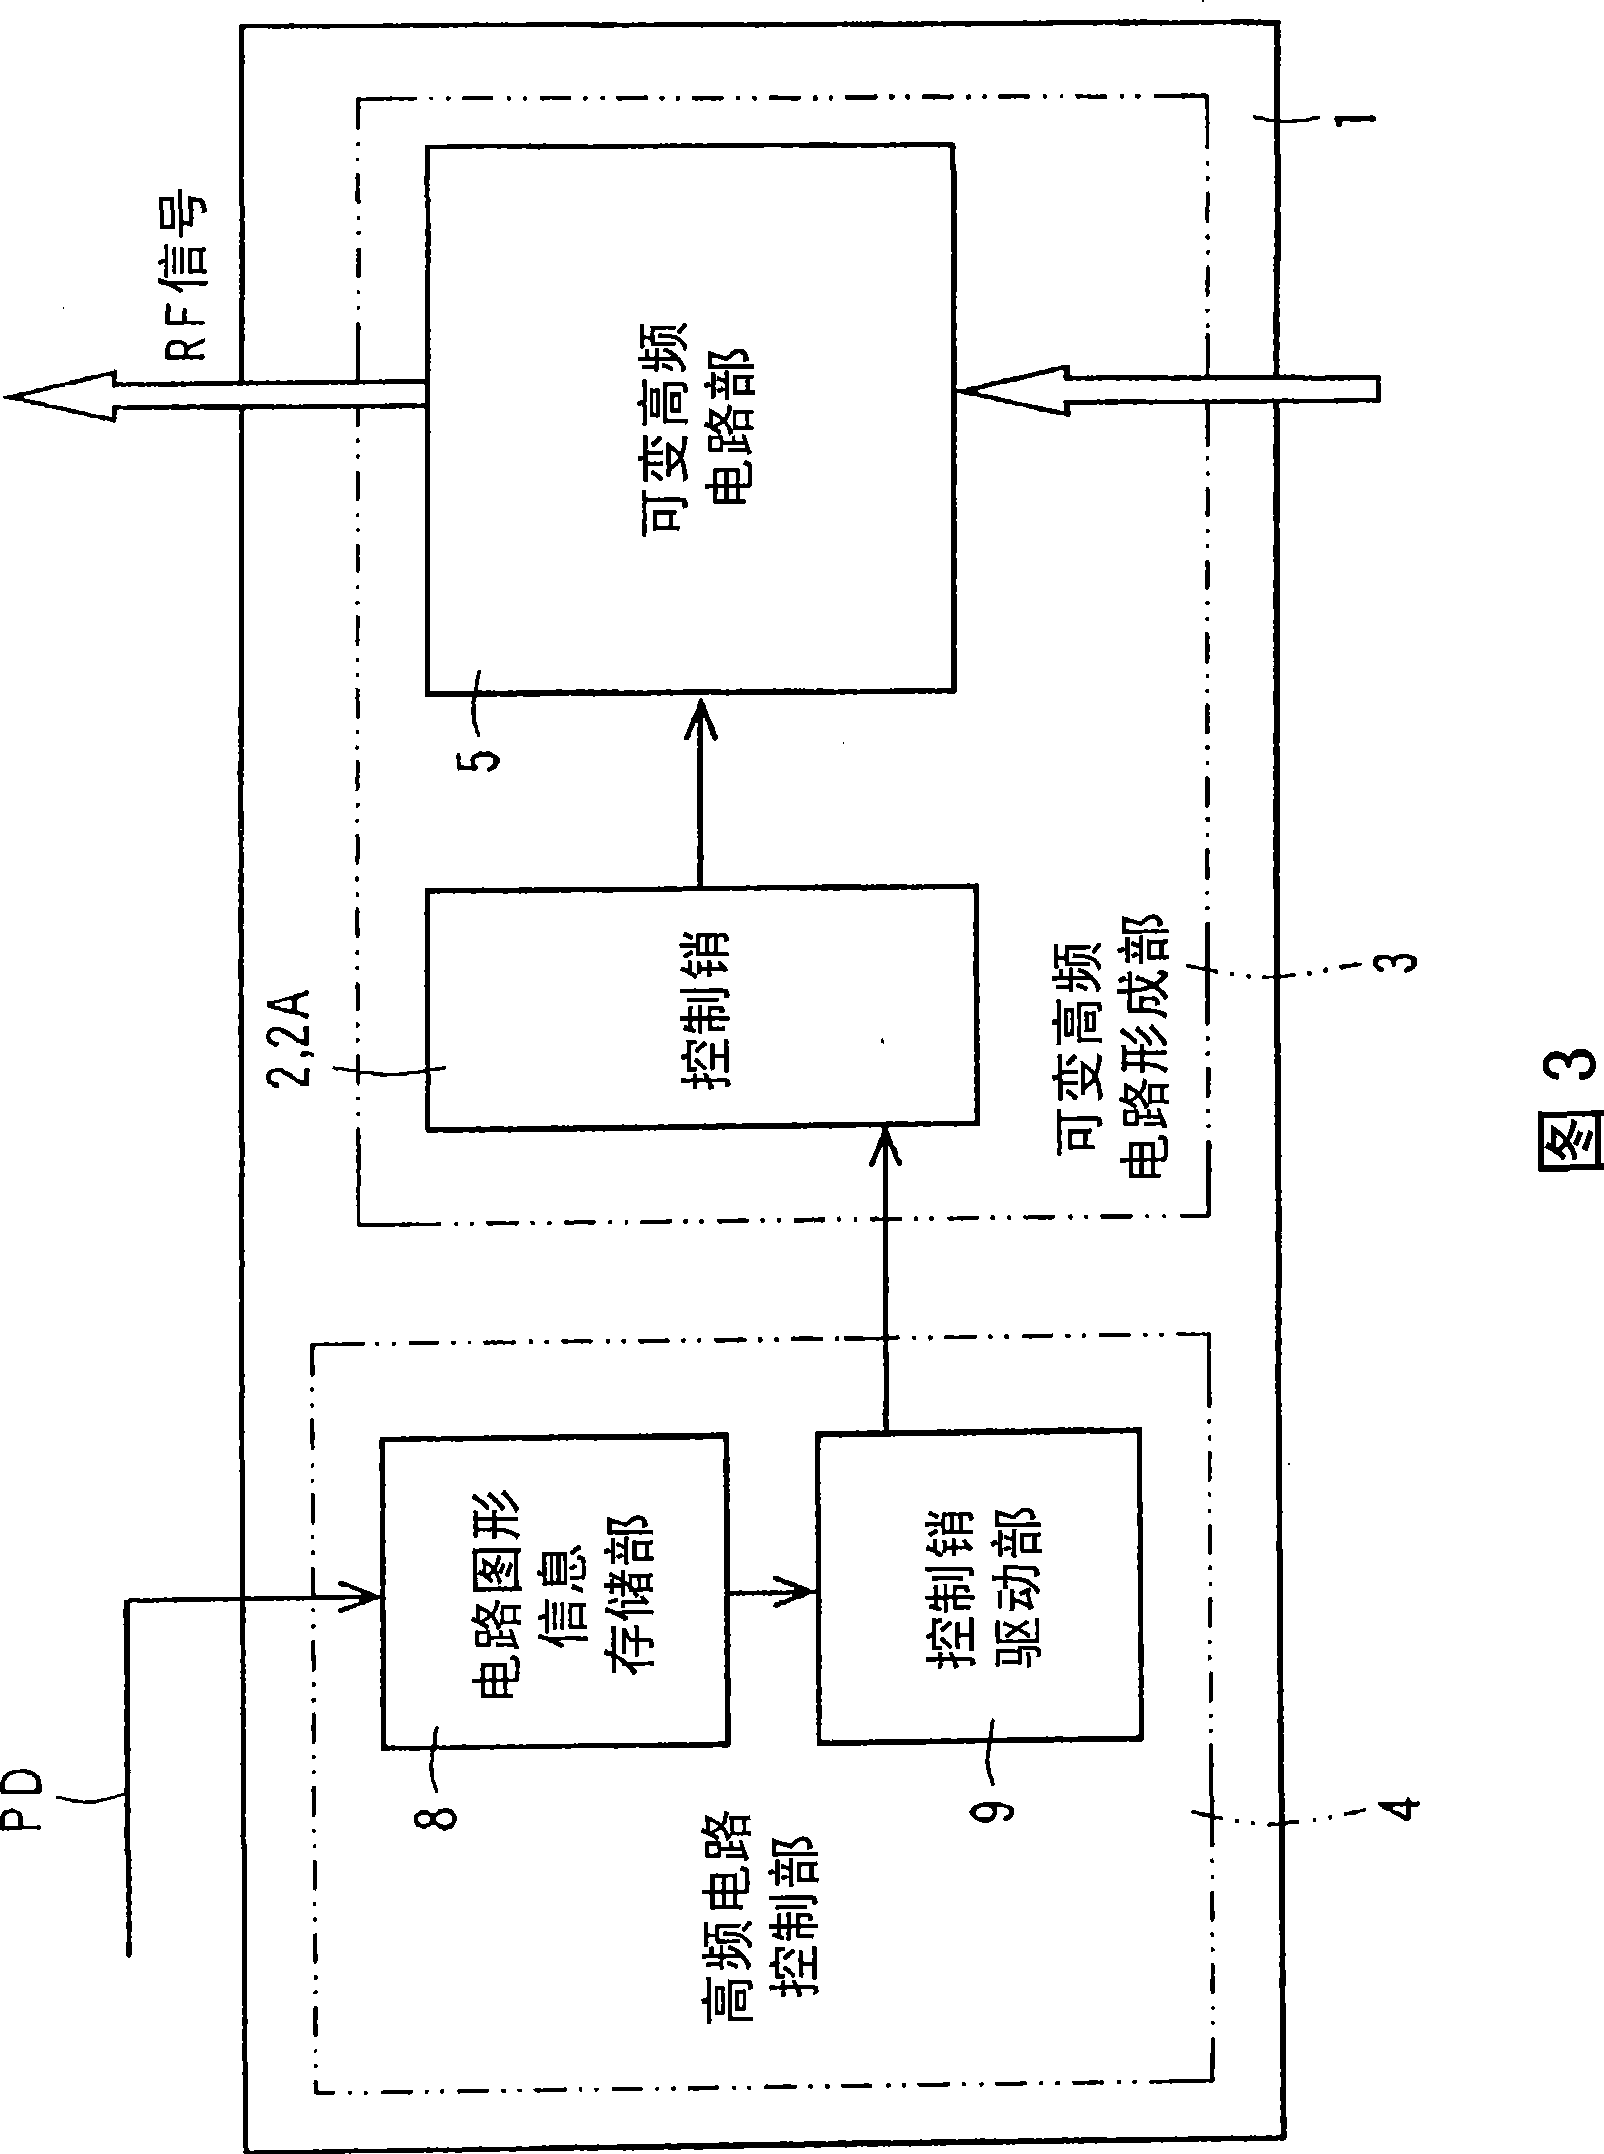 Waveguide forming apparatus, dielectric line forming apparatus, pin structure and high frequency circuit